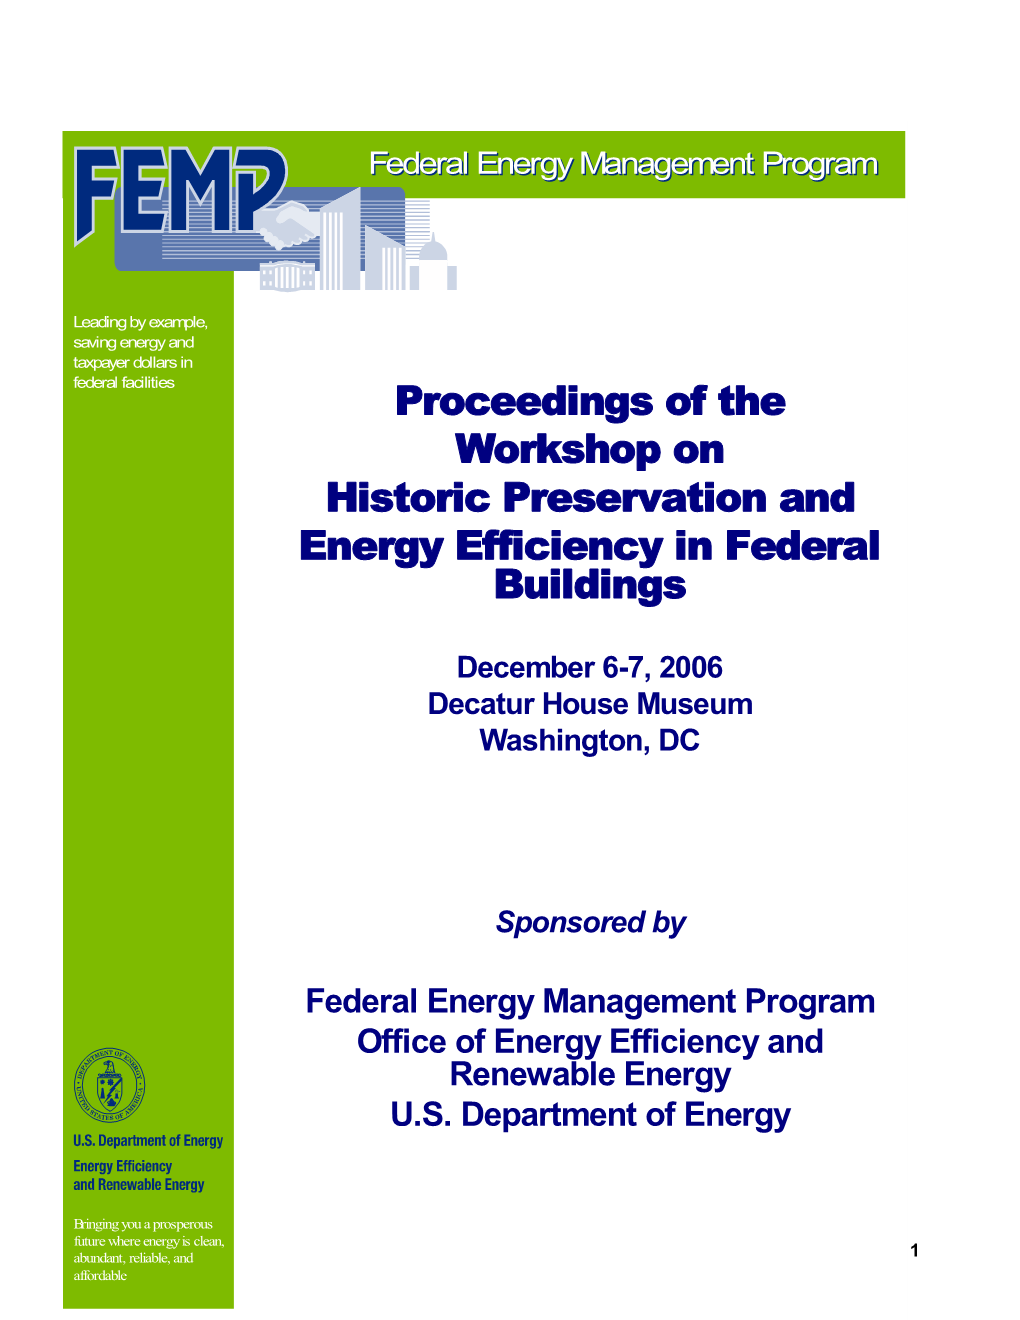 Historic Preservation and Energy Efficiency in Federal Buildings